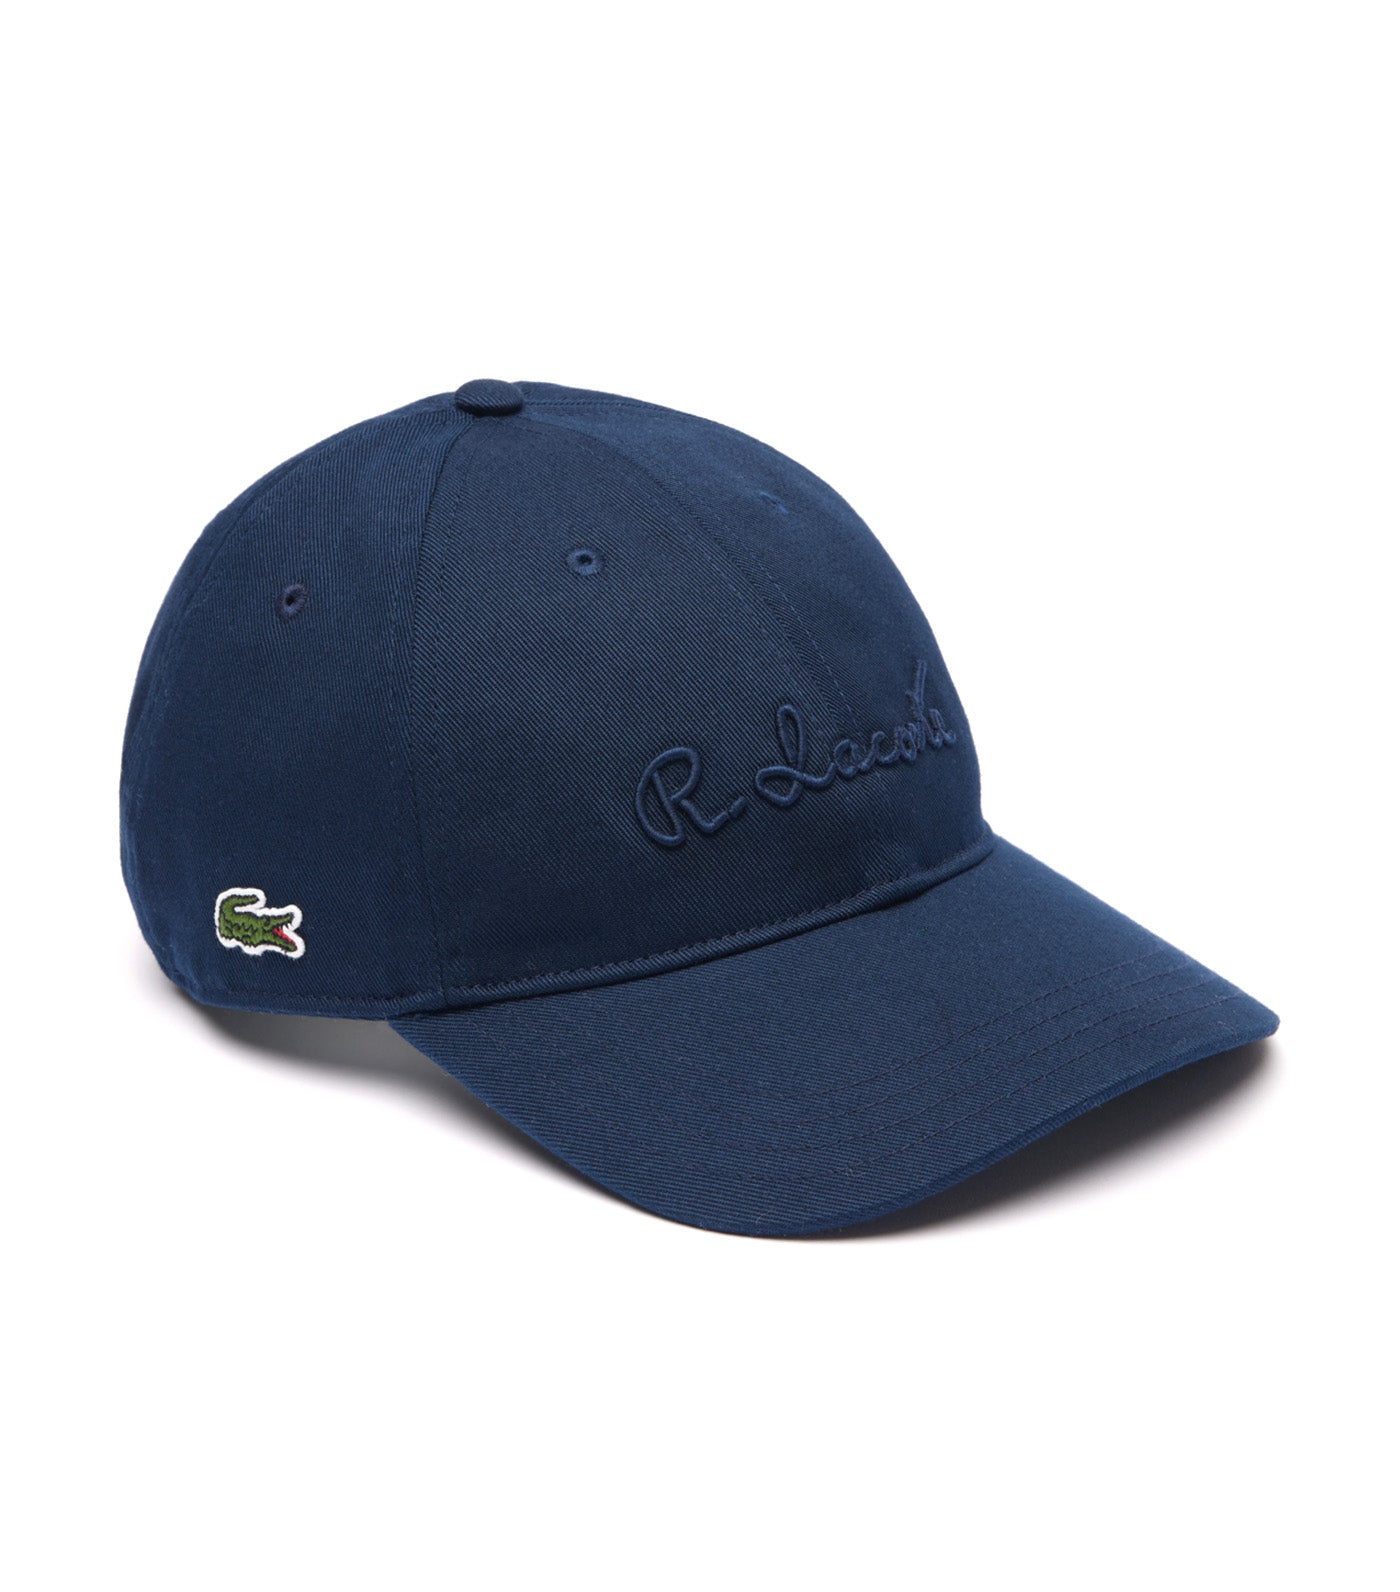 R. Lacoste 3D Embroidered Cap Navy Blue